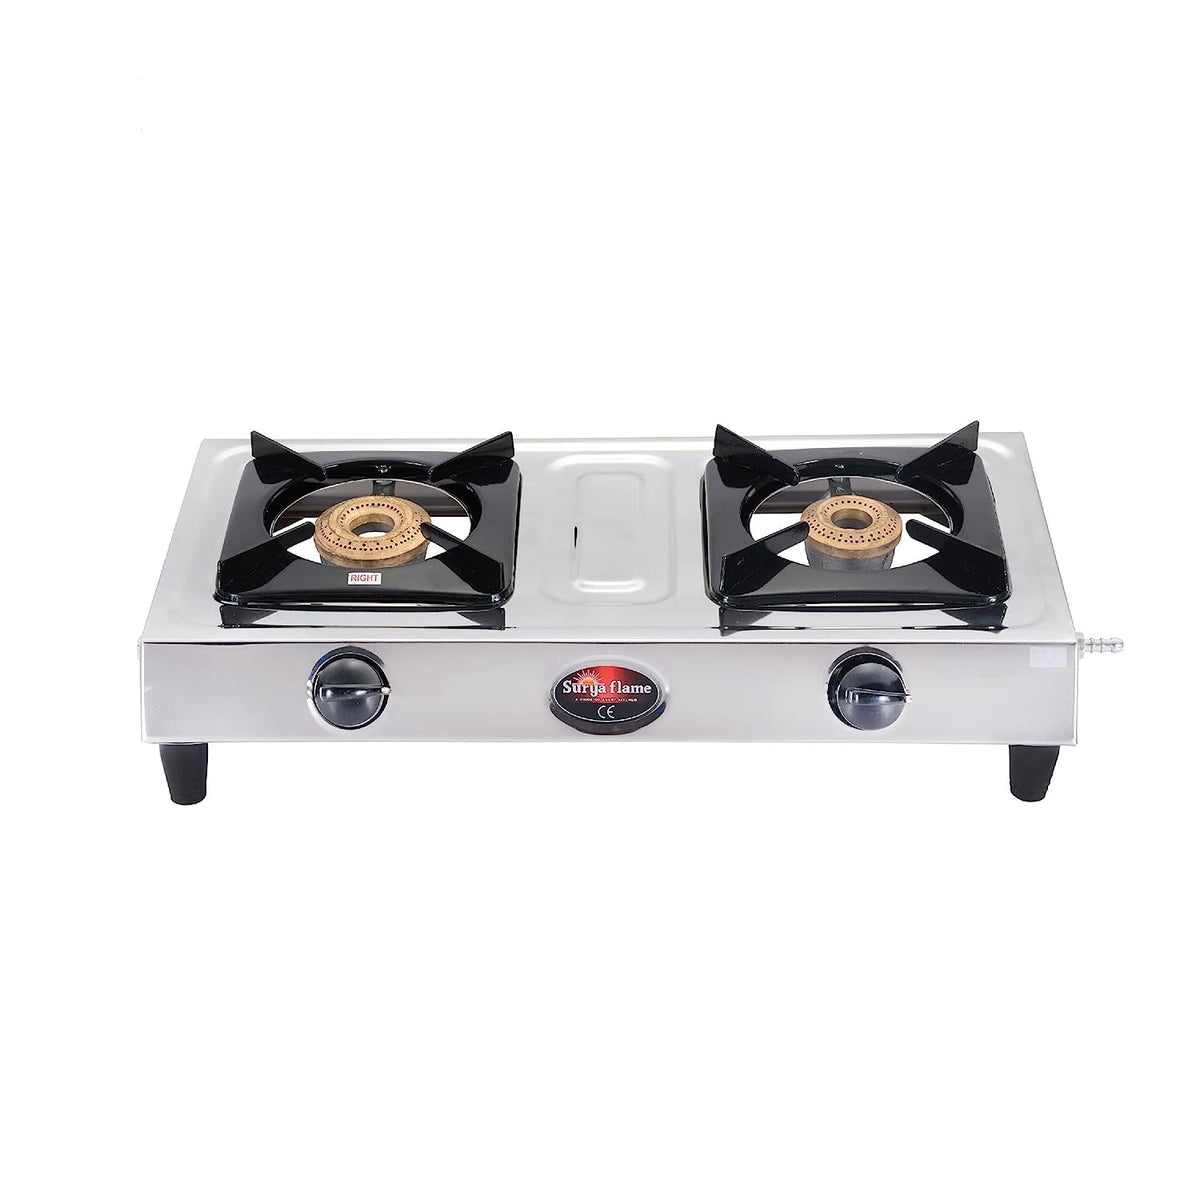 Surya Flame Vista Gas Stove 2 Burners | Stainless Steel Body | Manual LPG Stove With 69% Thermal Efficiency | Anti Skid Rubber Legs - 2 Years Complete Doorstep Warranty (1)